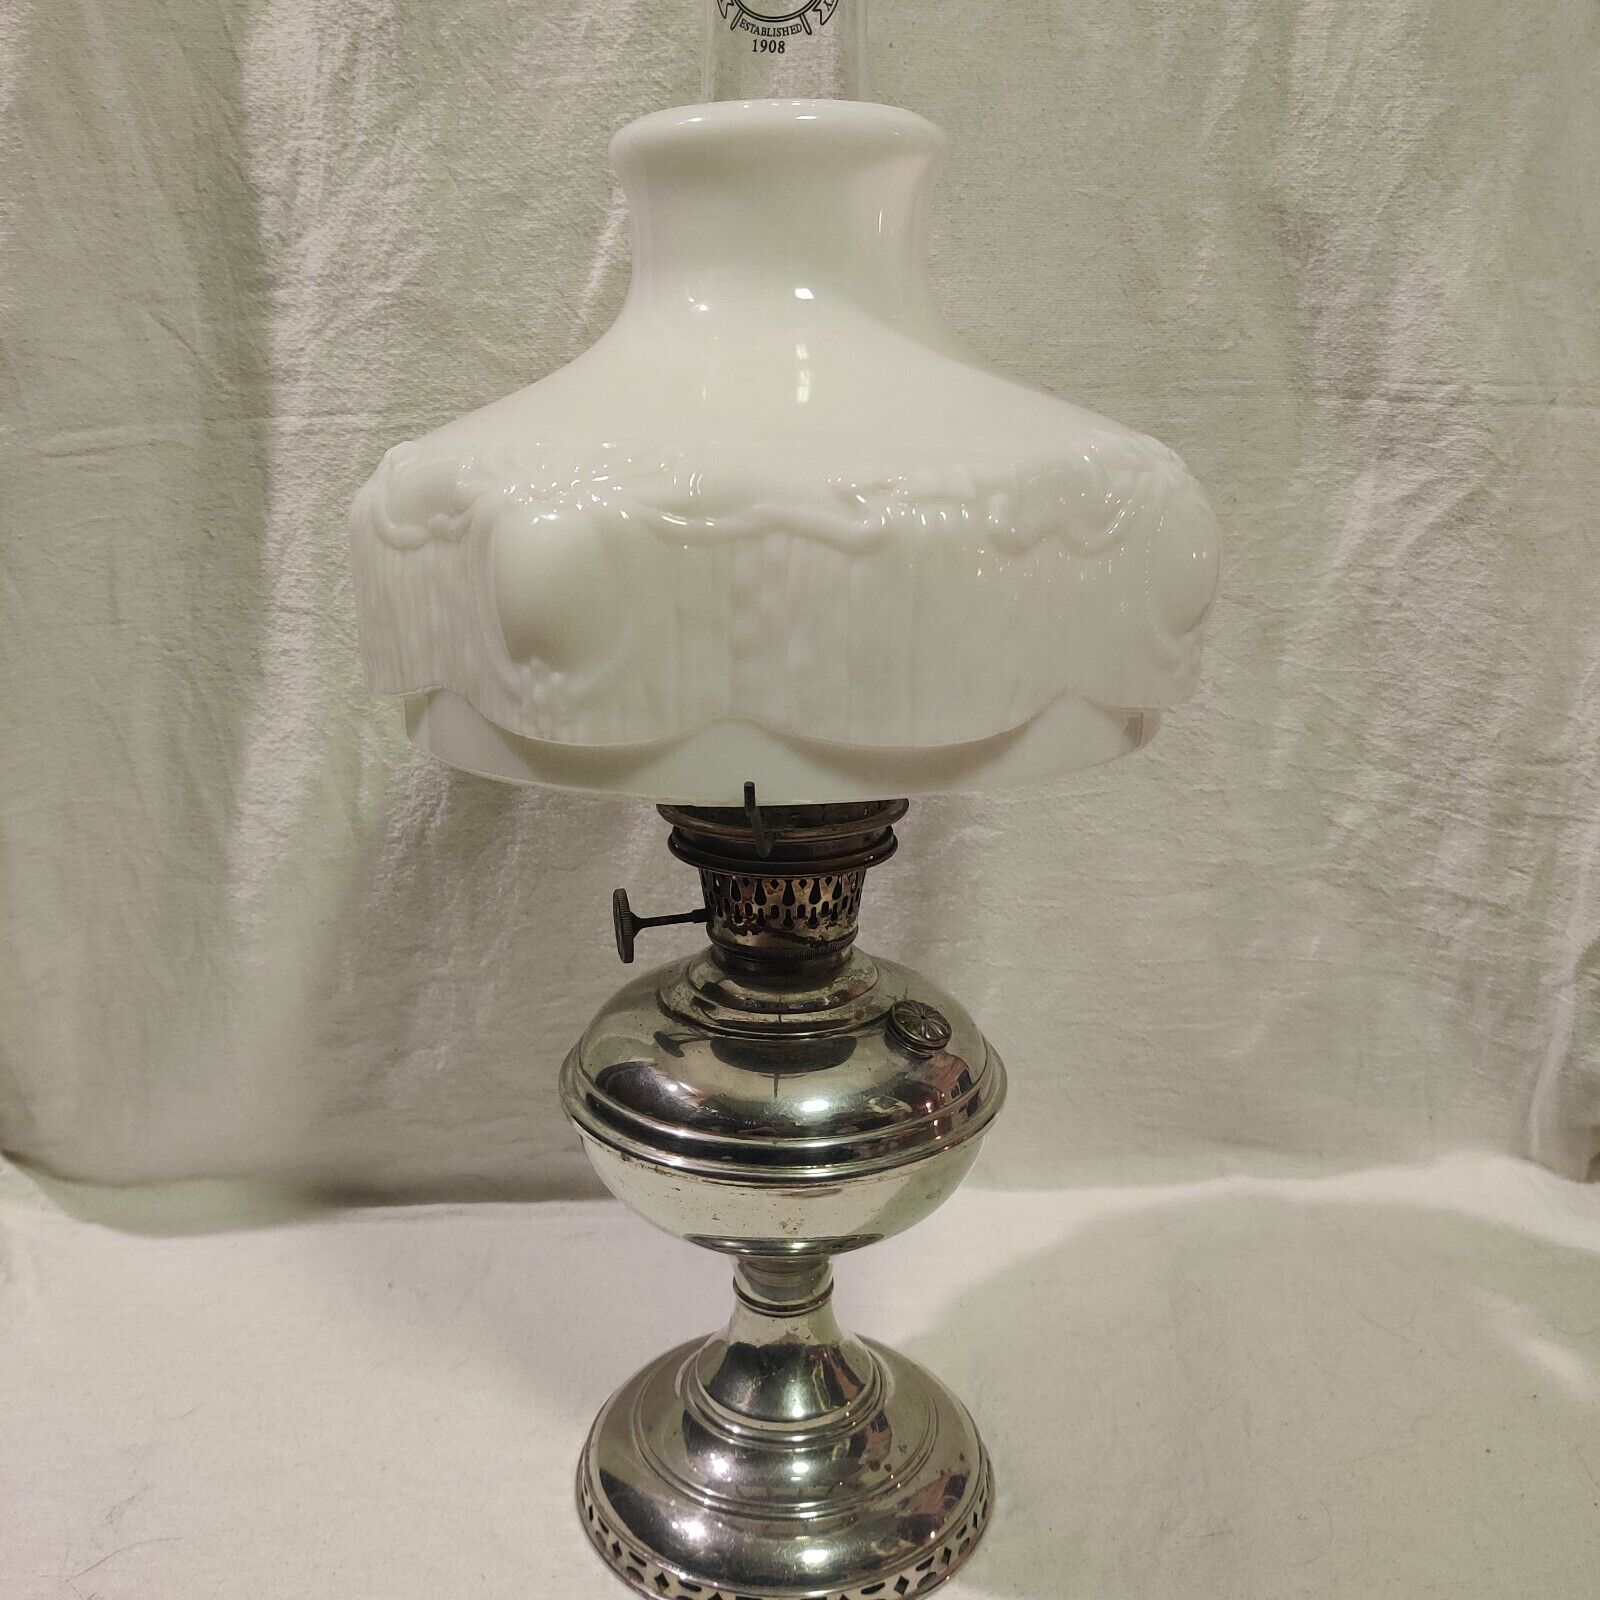 1913-1914 Antique Aladdin Model 5 Oil Lamp with 10